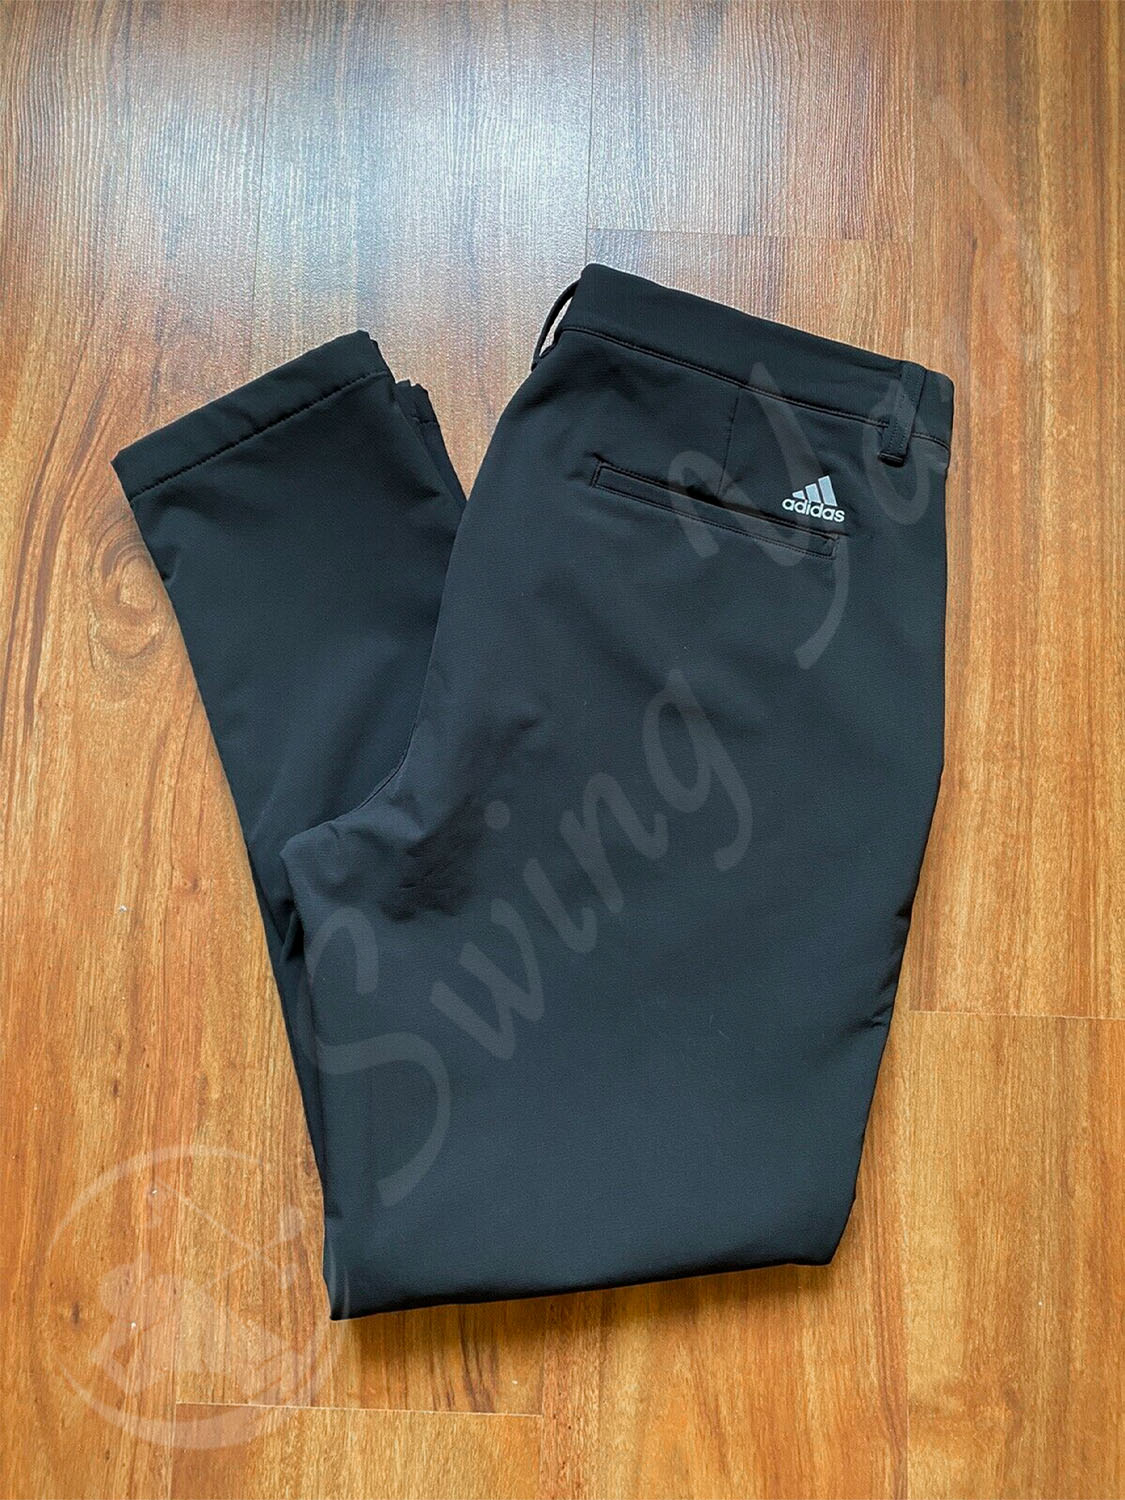 A folded Adidas men frostguard insulated pants at the floor